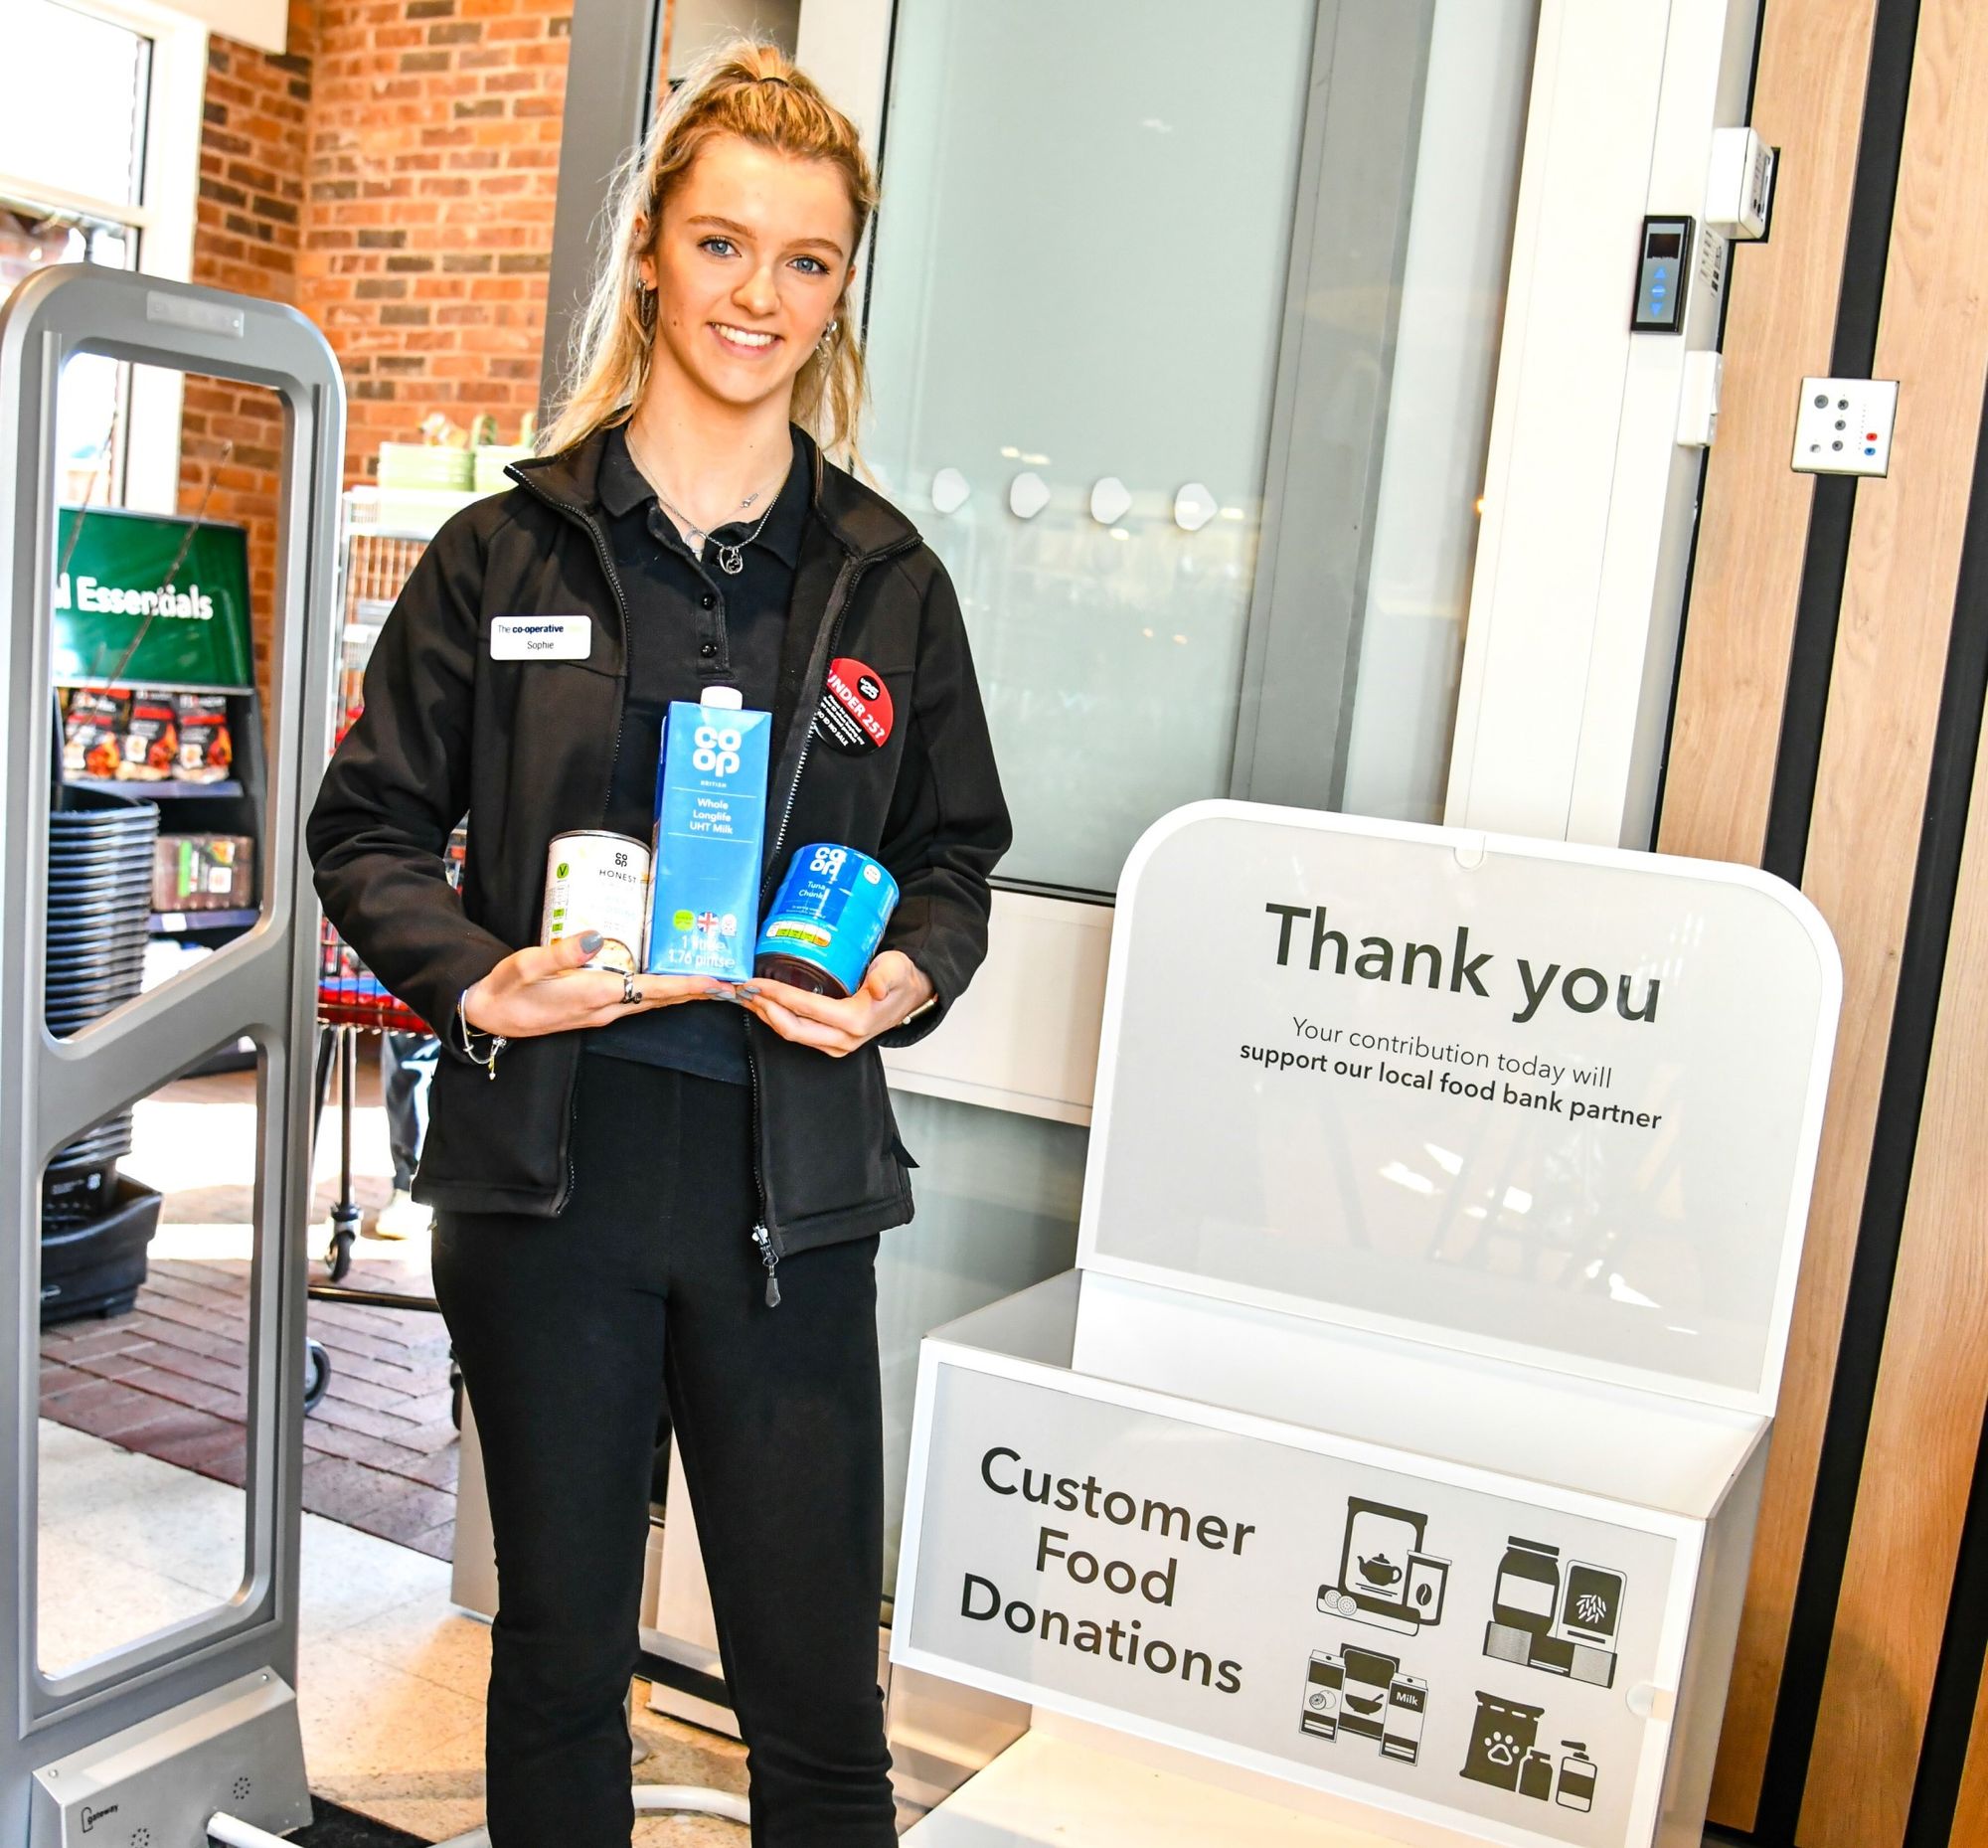 Central England Co-op launches Easter appeal to support food banks